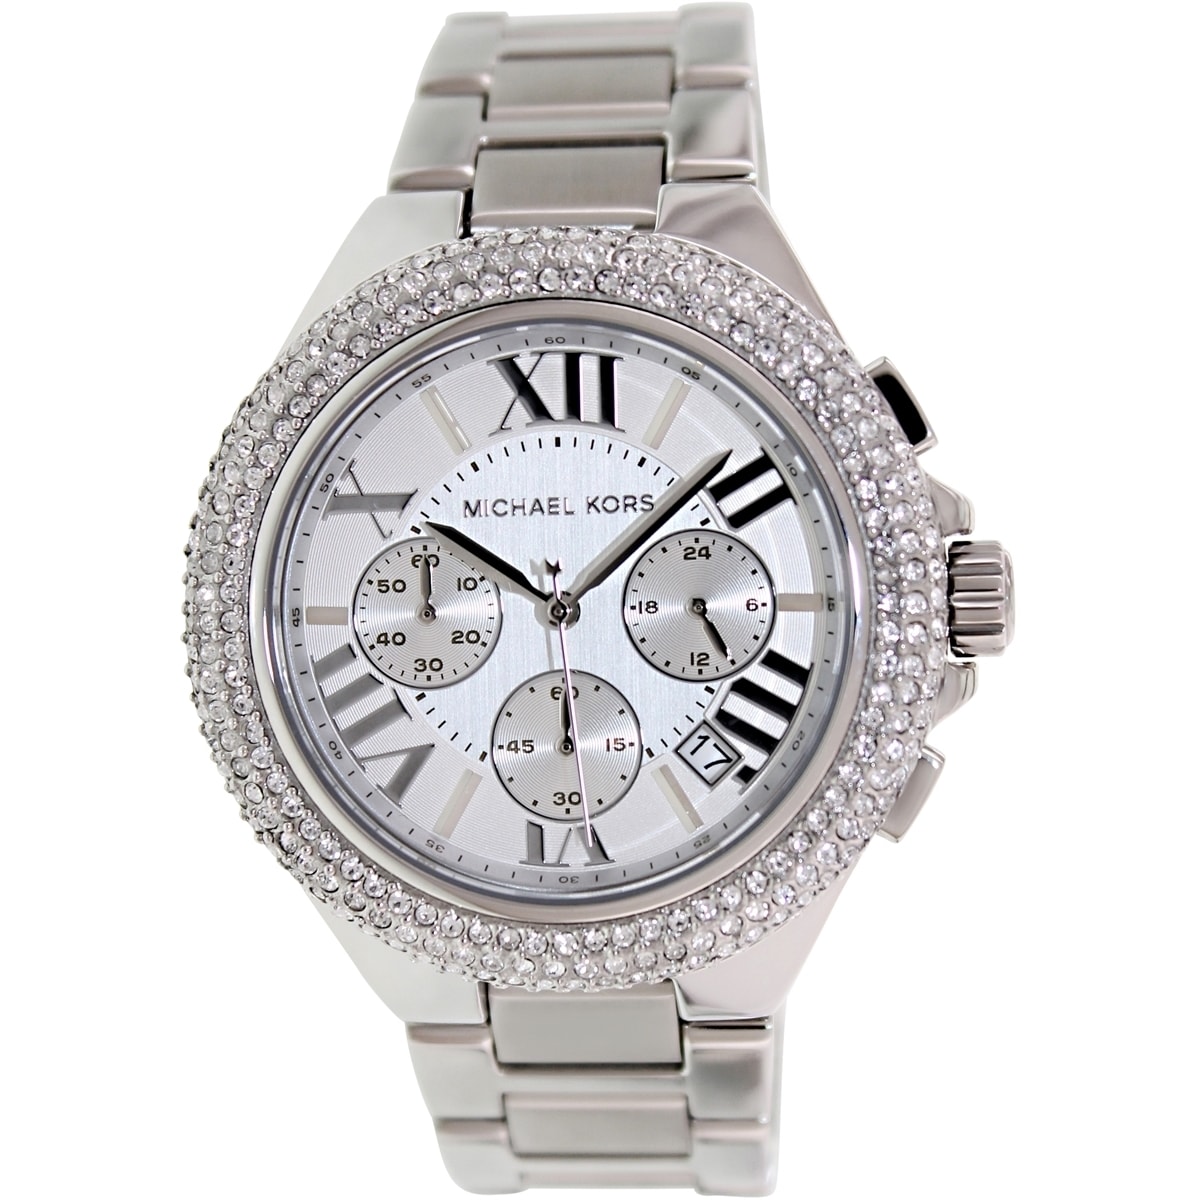 Michael Kors Womens Bella Crystal accented Watch Today $285.69 4.3